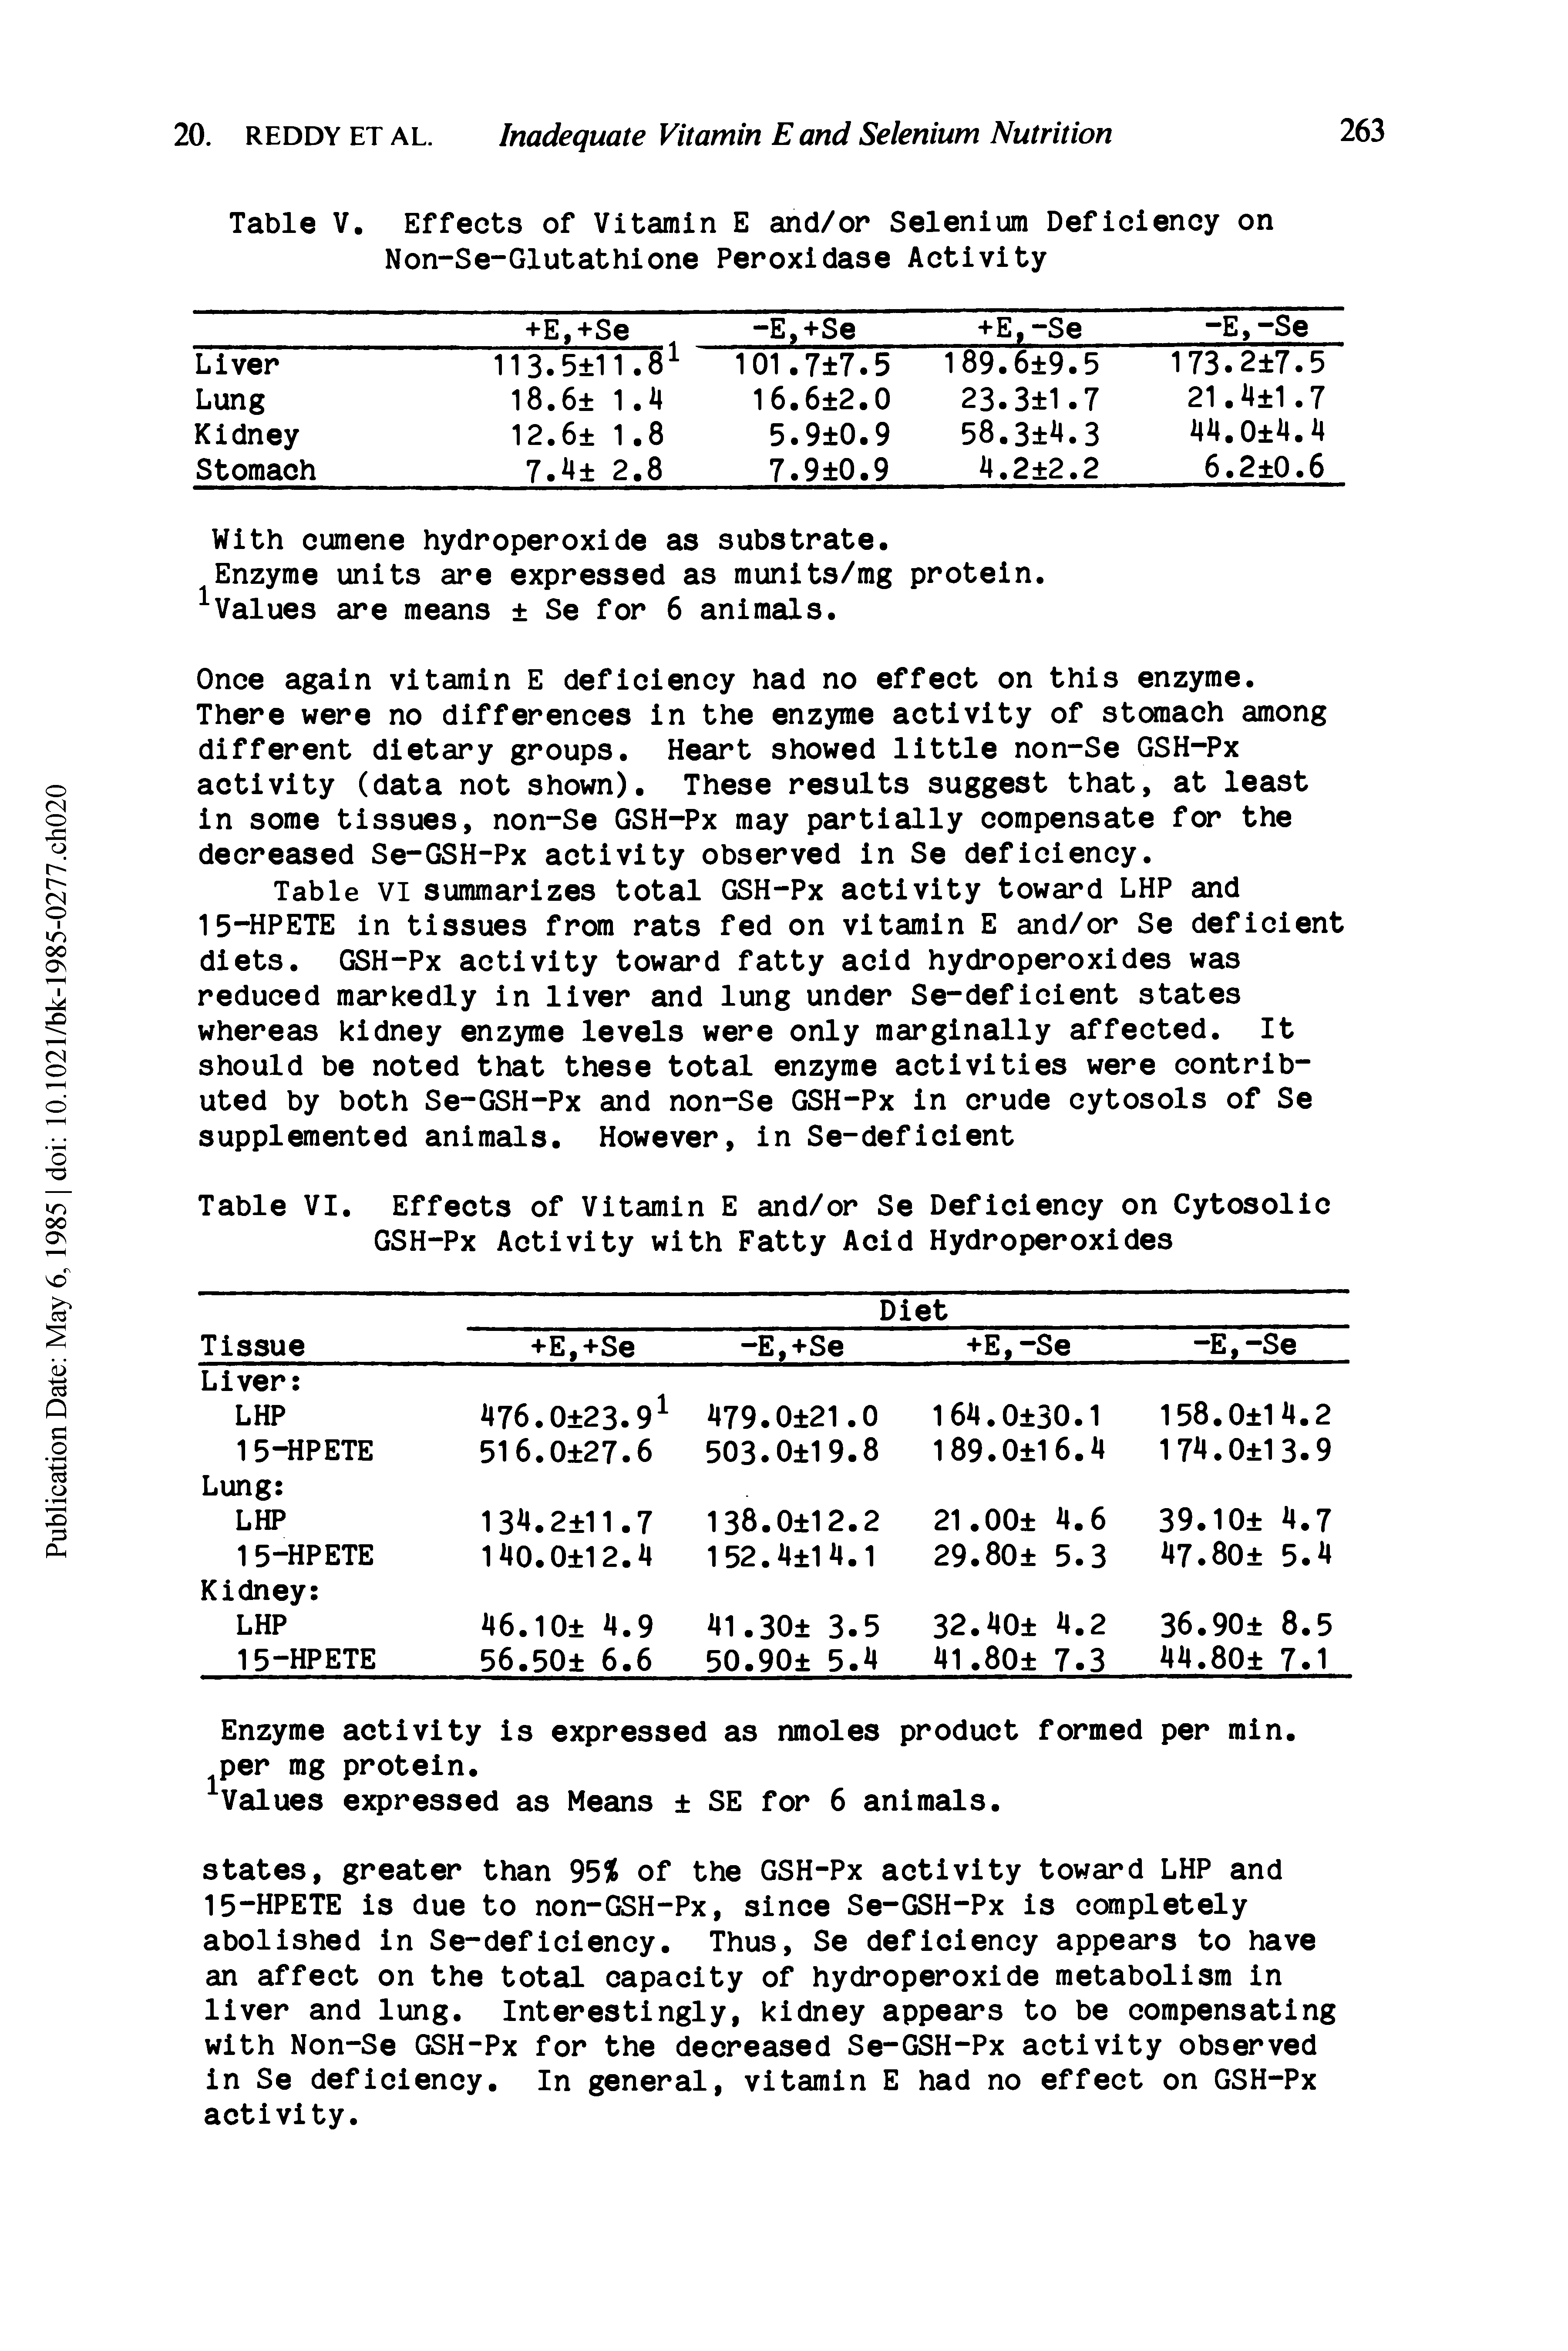 Table VI summarizes total GSH-Px activity toward LHP and 15-HPETE in tissues from rats fed on vitamin E and/or Se deficient diets. GSH-Px activity toward fatty acid hydroperoxides was reduced markedly in liver and lung under Se-deficient states whereas kidney enzyme levels were only marginally affected. It should be noted that these total enzyme activities were contributed by both Se-GSH-Px and non-Se GSH-Px in crude cytosols of Se supplemented animals. However, in Se-deficient...